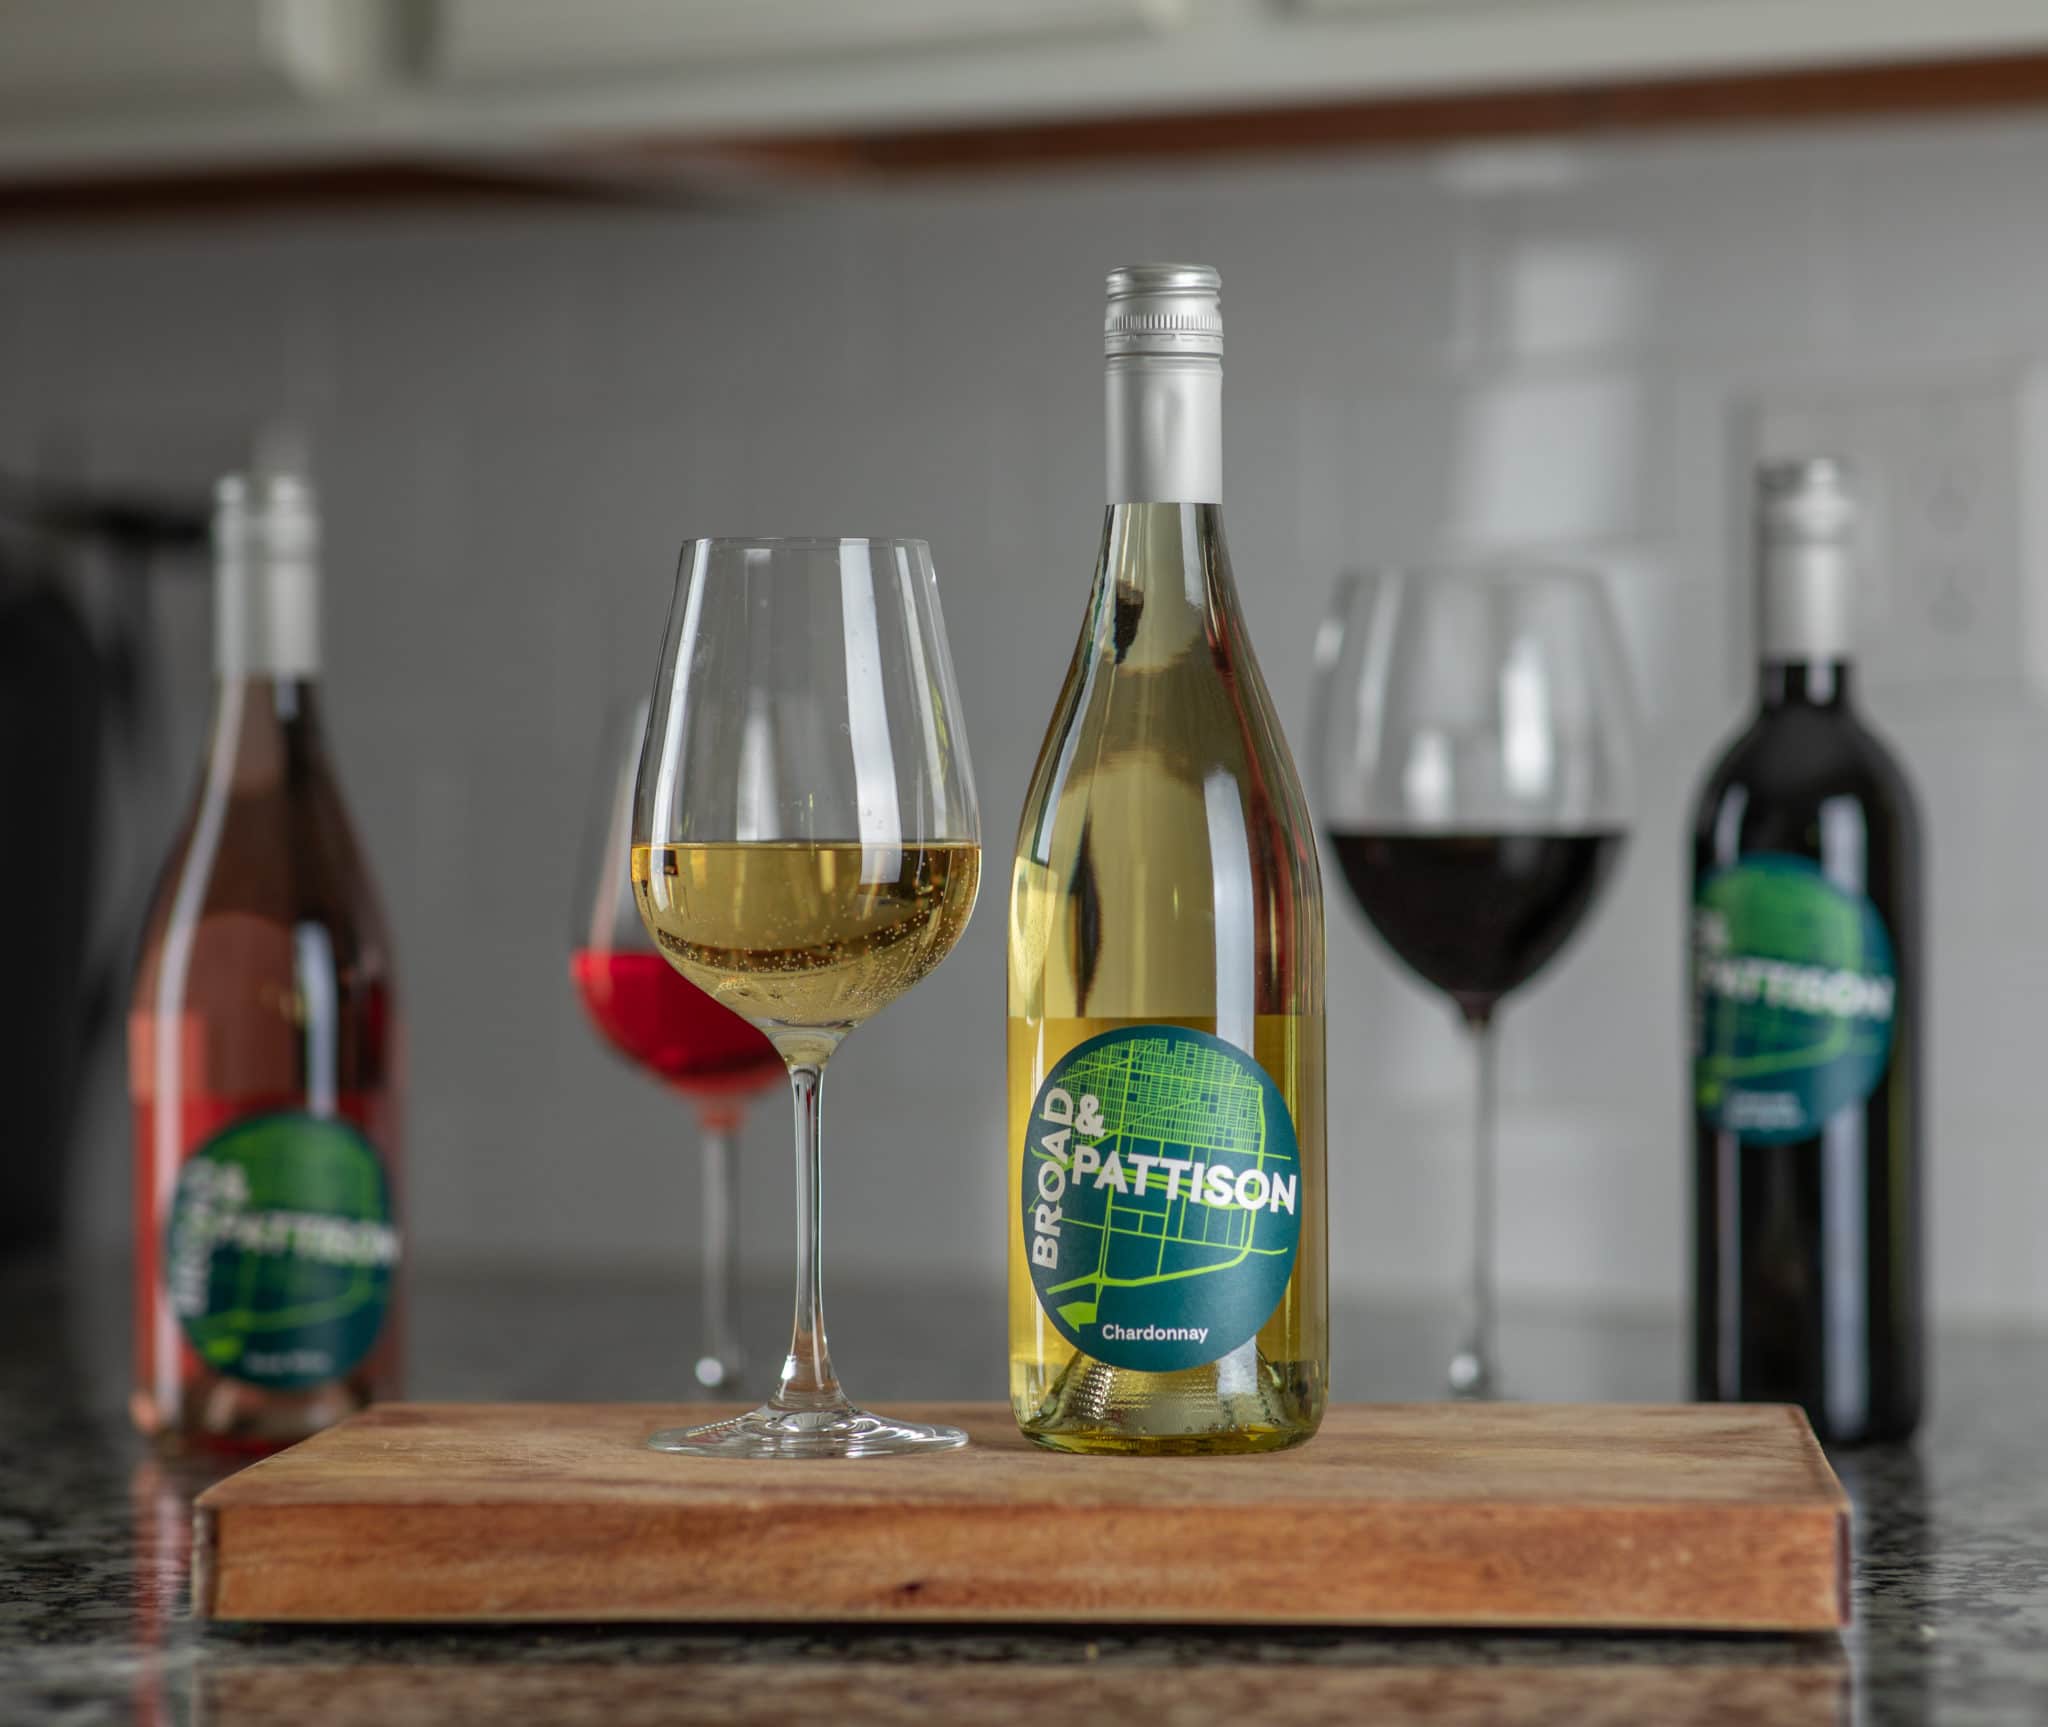 Eagles Launch a “Broad and Pattison” Wine Collection